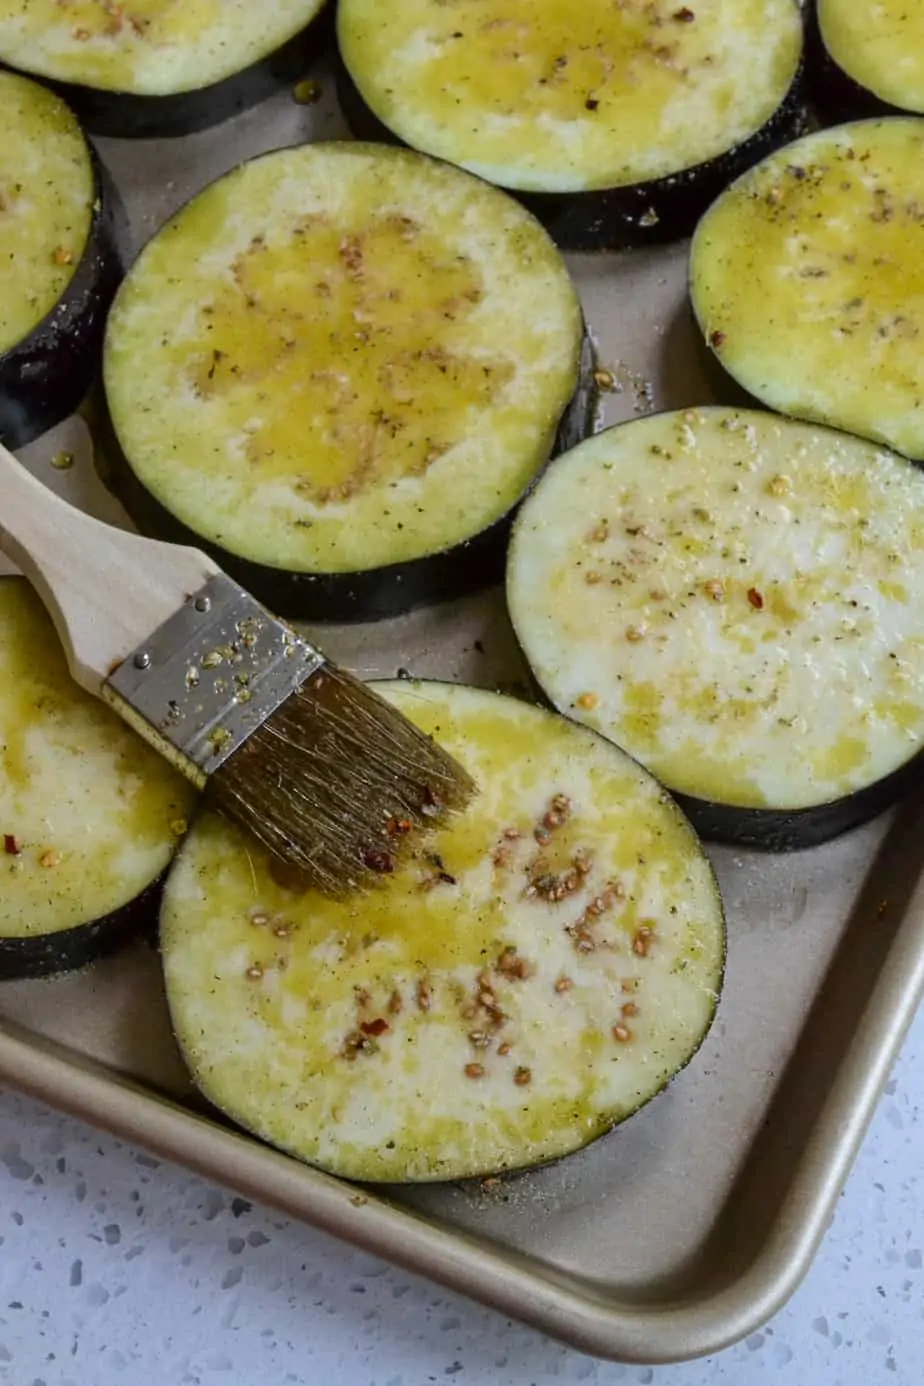 Brushed eggplant with olive oil and herbs. 